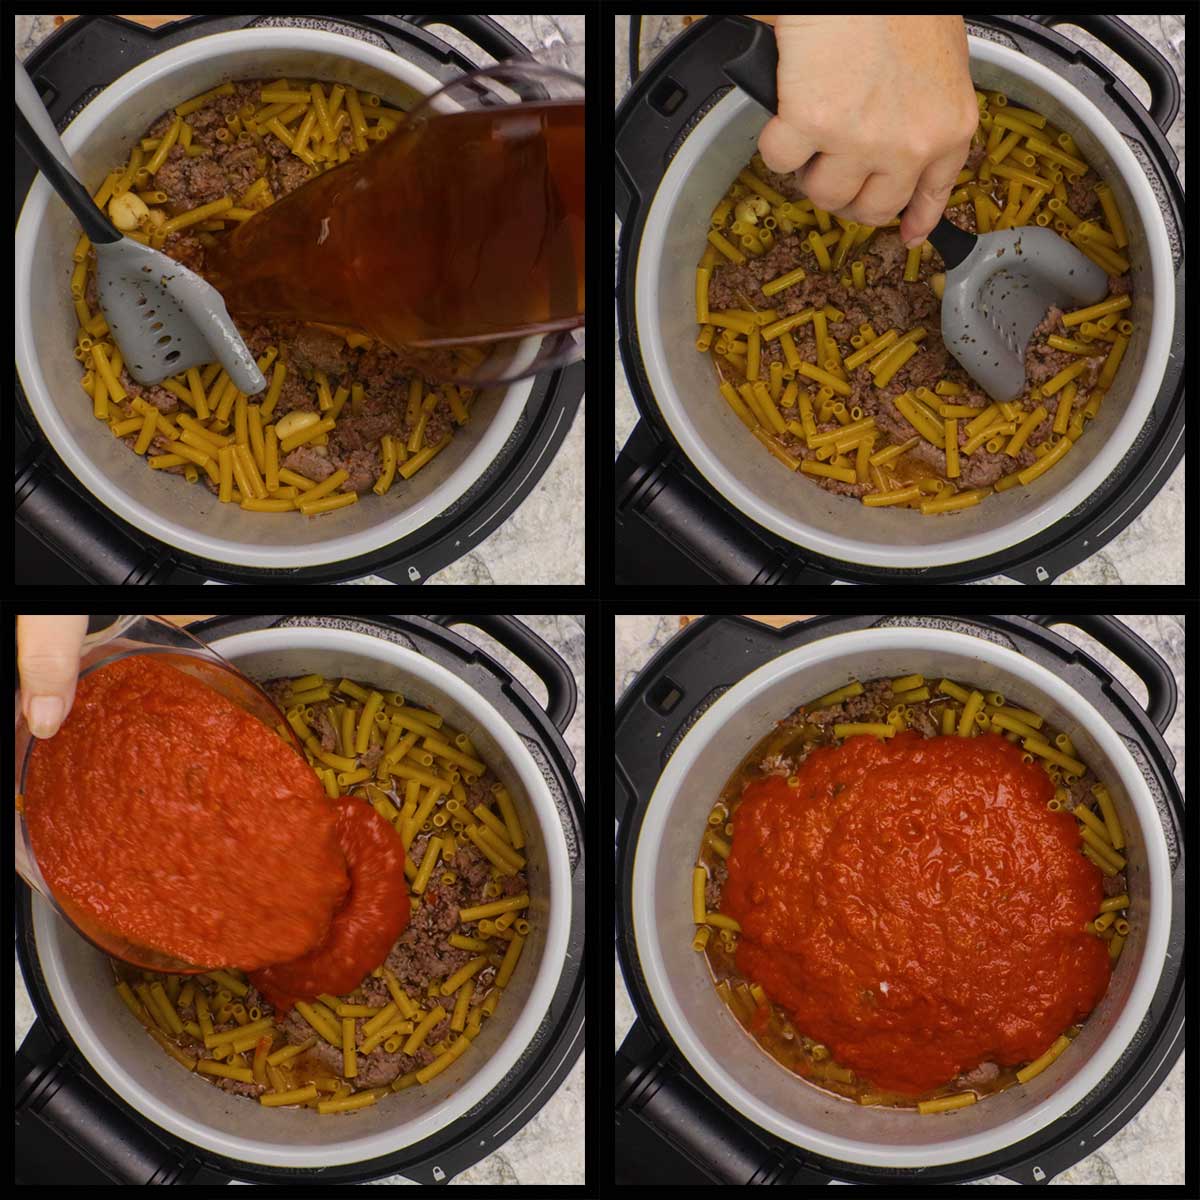 Pouring in liquid and pressing the pasta down, then pouring the marinara sauce on top.